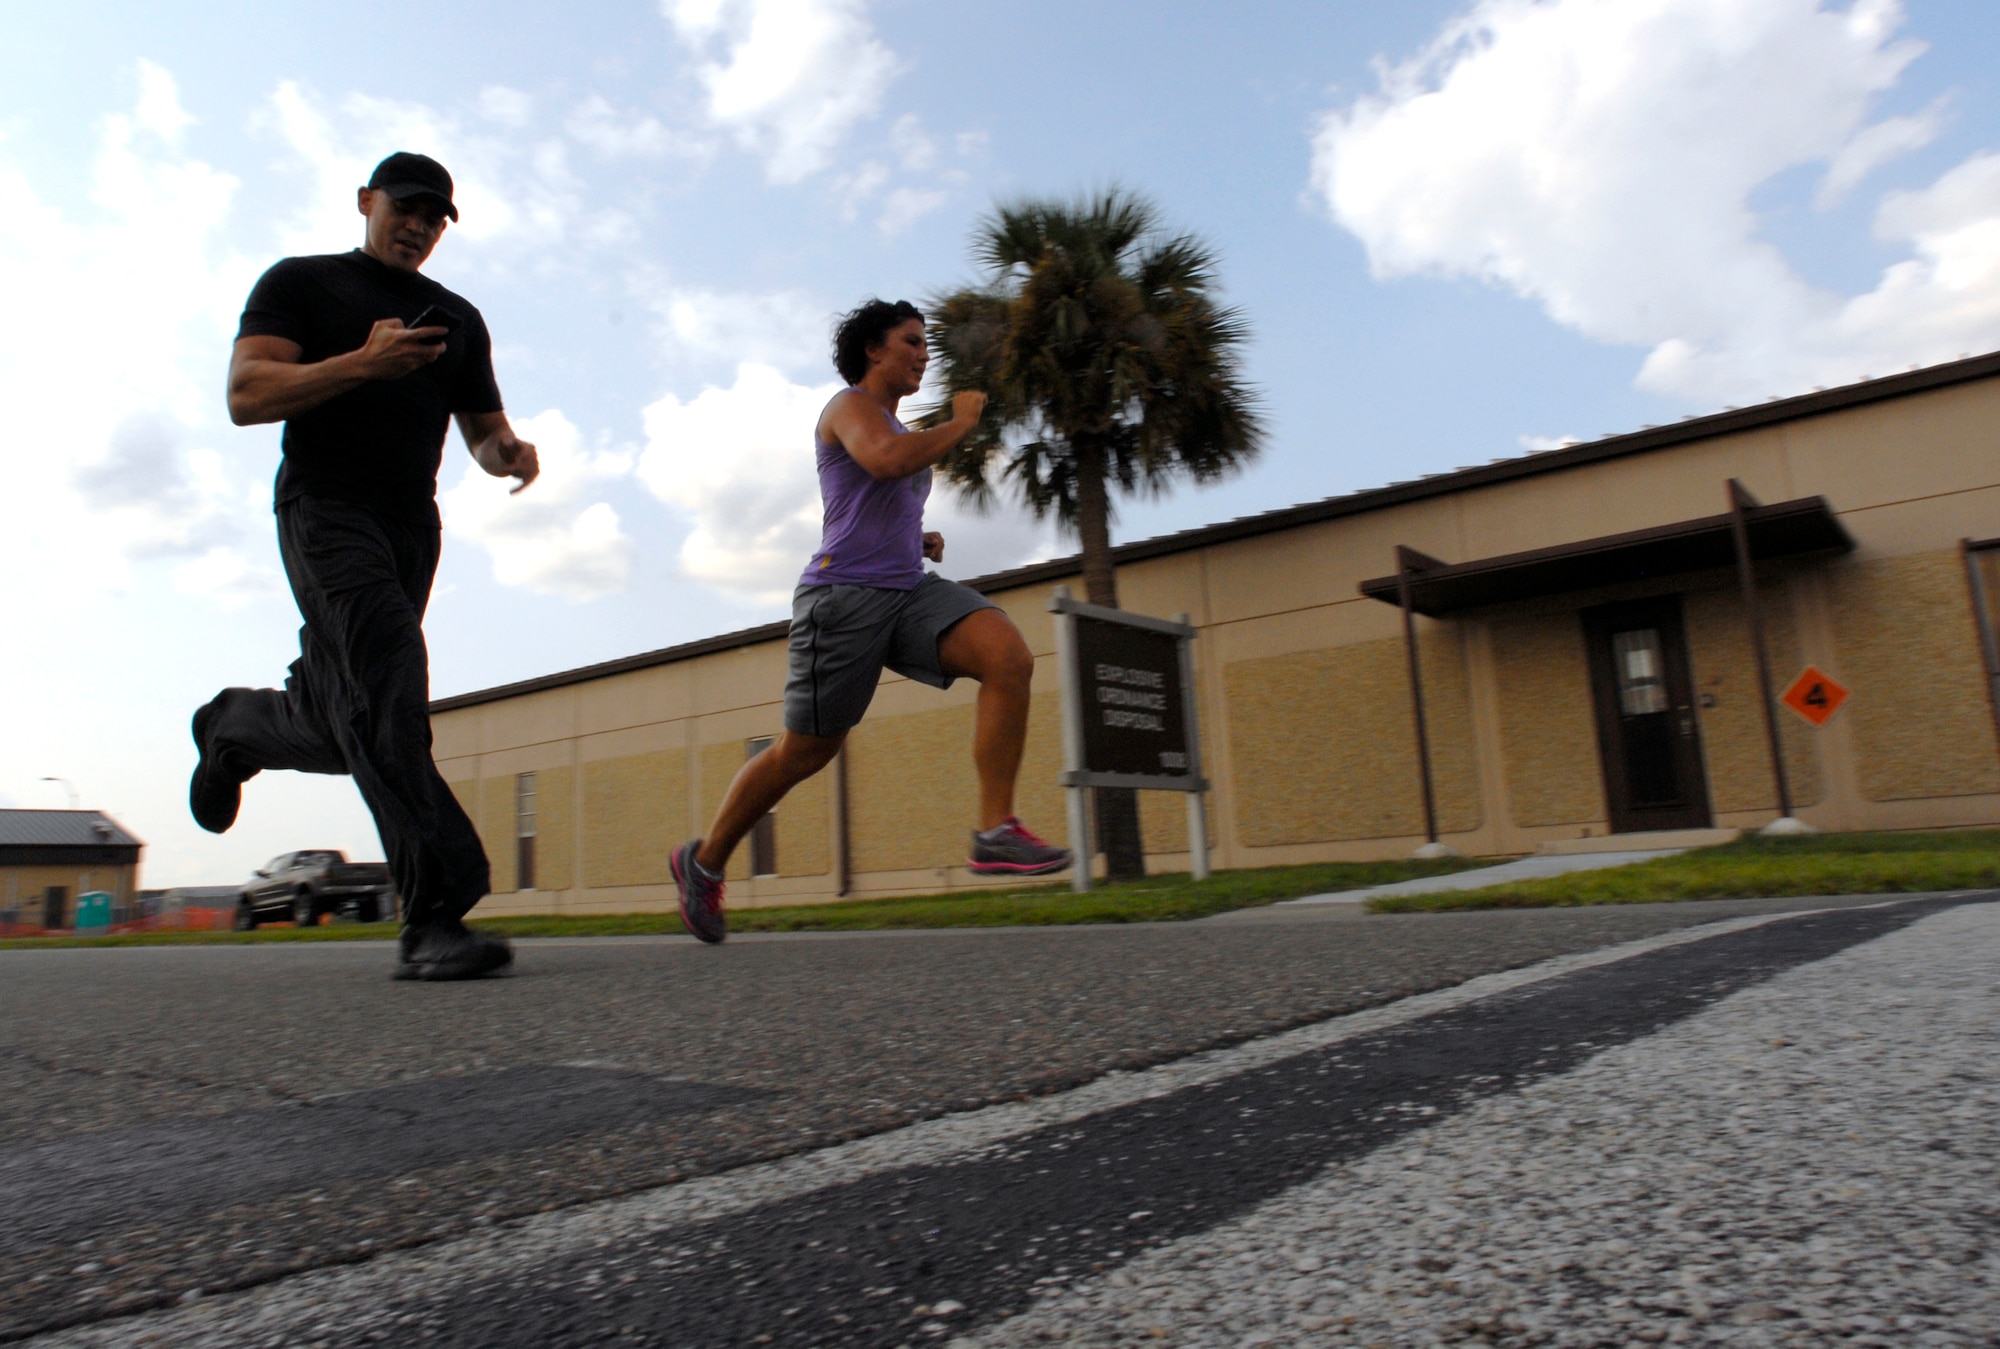 125th Fighter Wing Medical Service Journeyman, Staff Sgt. Mariam Abdallah (right), finishes a 400 yard run with 125th Fighter Wing Health Promotions Officer, Captain Jesus Garcia by her side,125th Fighter Wing, Jacksonville, Fla, August 18, 2012. Garcia and his partner Christina Sox,  have developed an easy to follow fitness plan utilizing Tabata, a high intensity interval training tool aimed to help members of the 125th Fighter Wing, Florida Air National Guard meet their fitness goals.  (Air National Guard photo by MSgt. Shelley Gill)